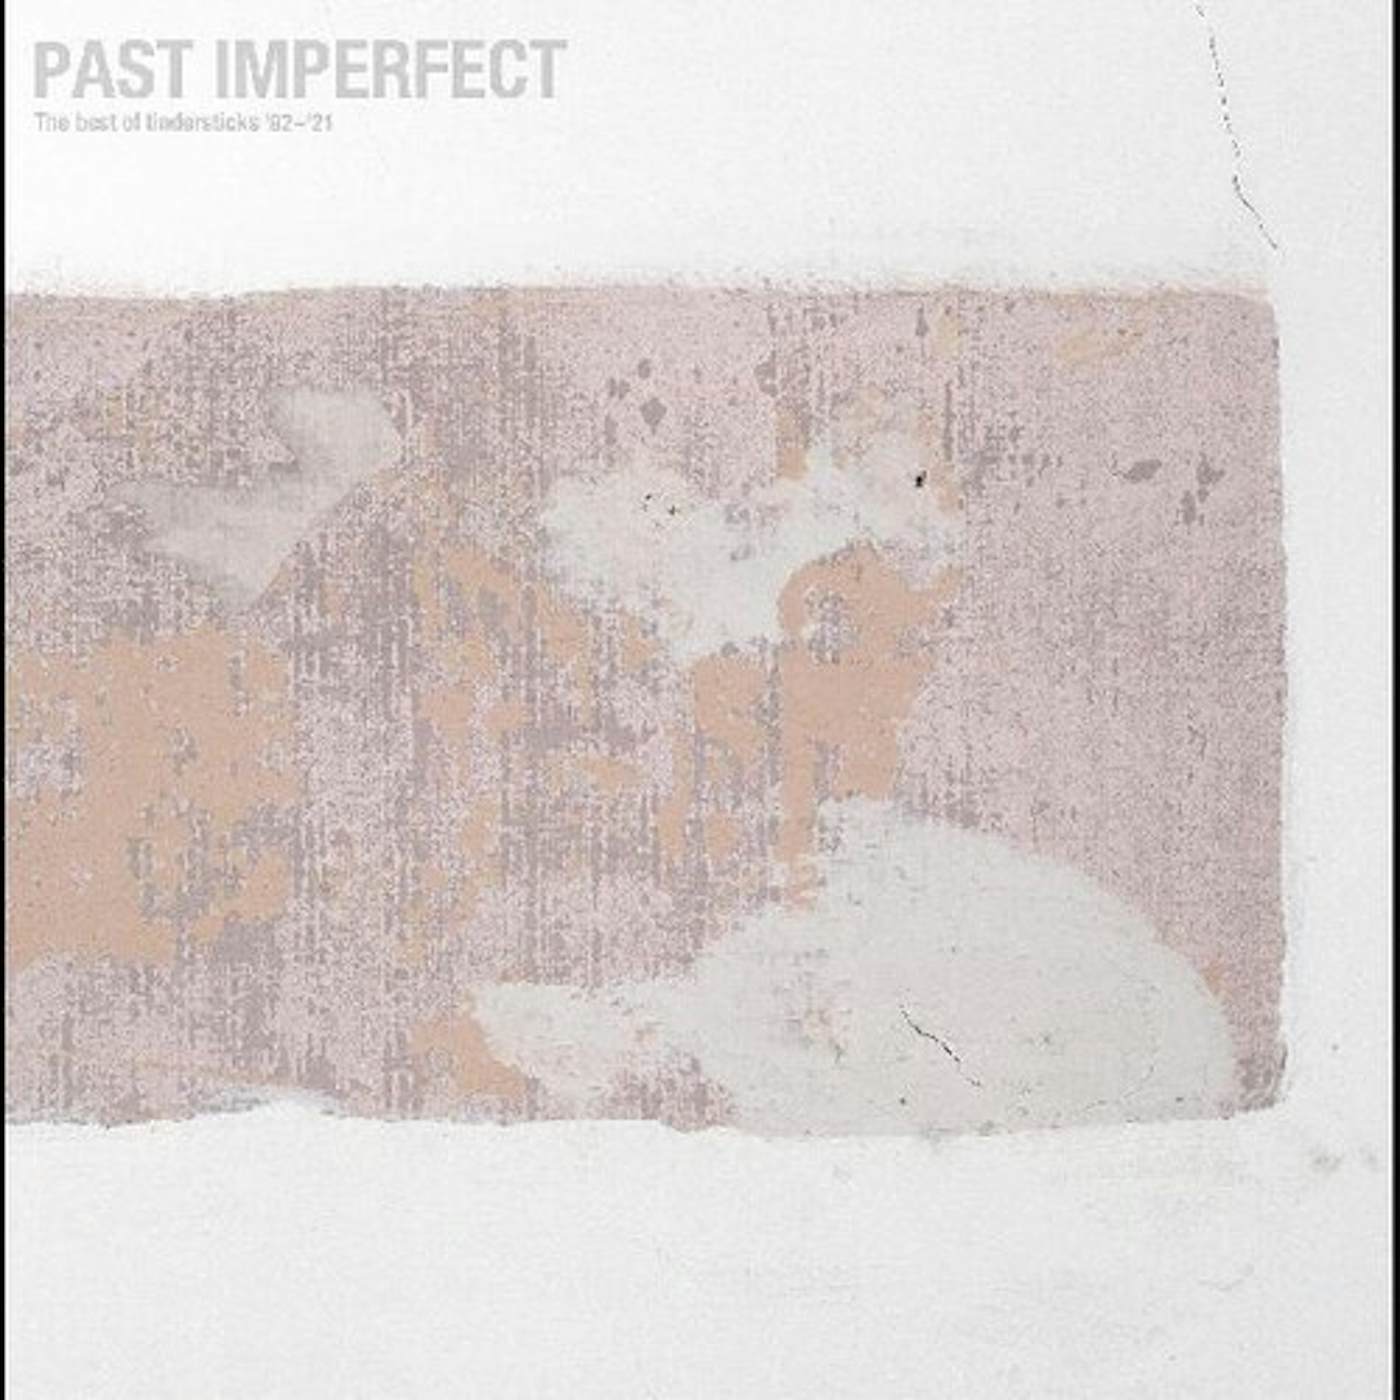 PAST IMPERFECT THE BEST OF TINDERSTICKS '92-'21 CD